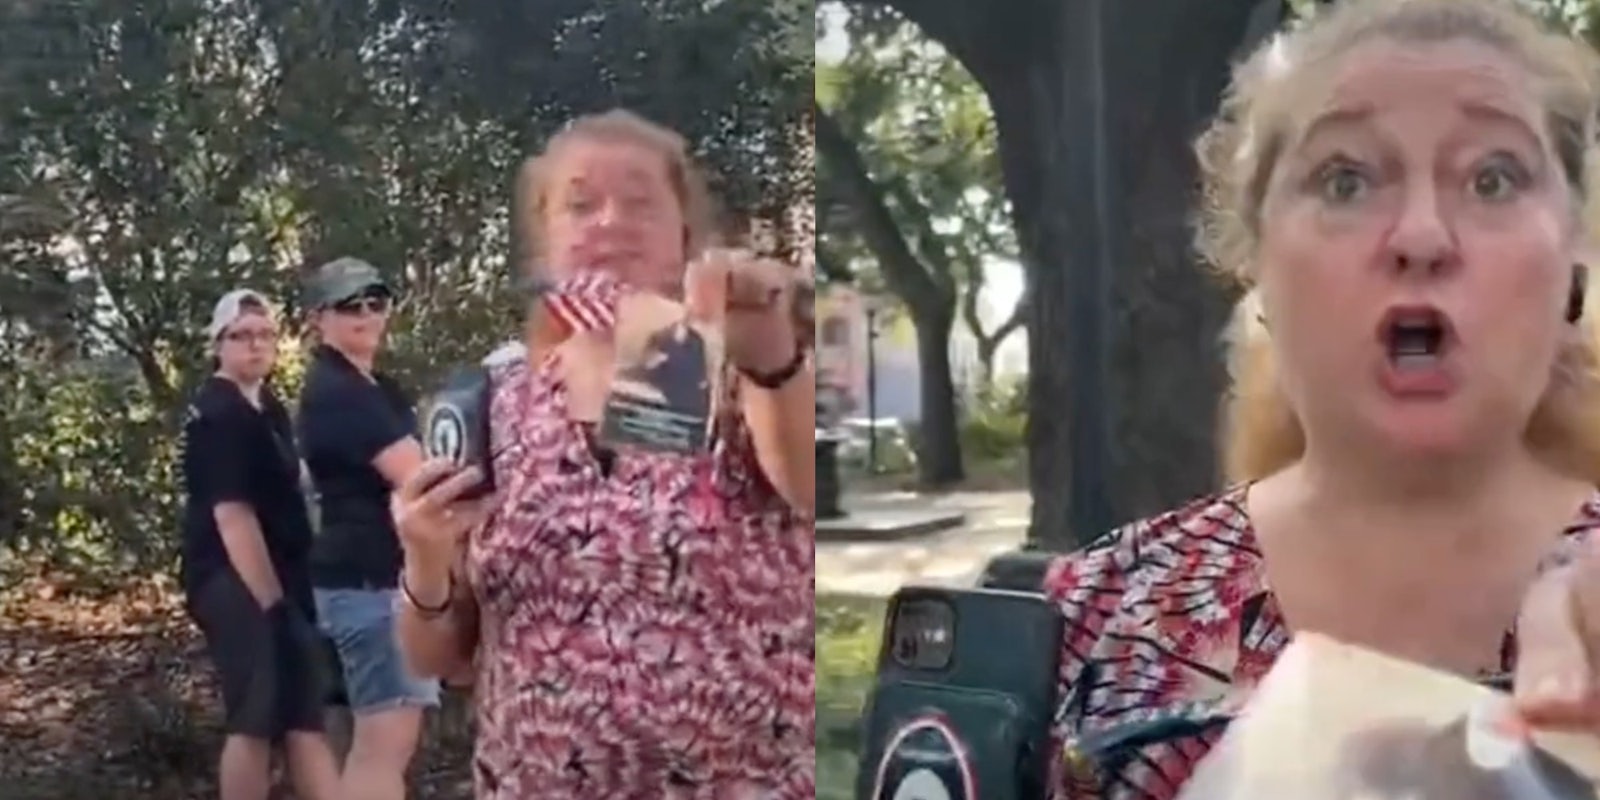 A white woman assaulted a Black woman for refusing to accept the constitution from her